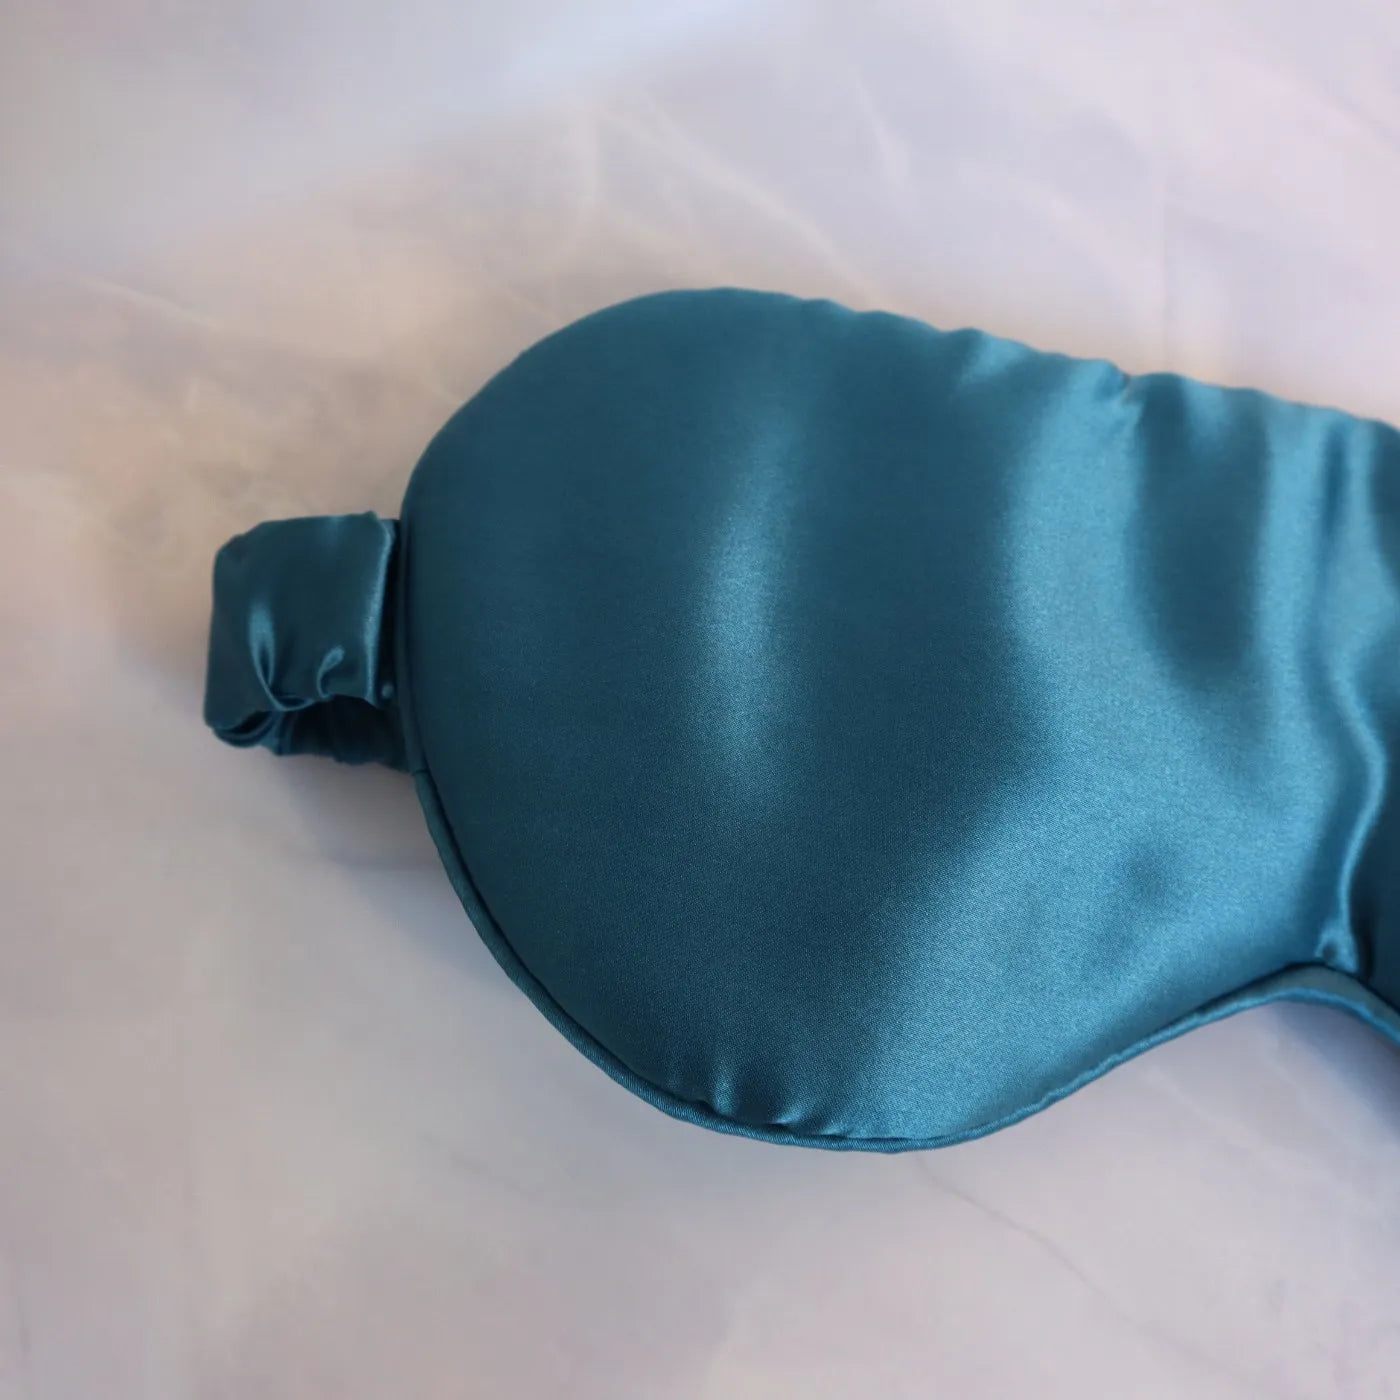 Luxury 22mm 100% Mulberry Silk Eye Mask in Teal Blue 22 mm Real Silk